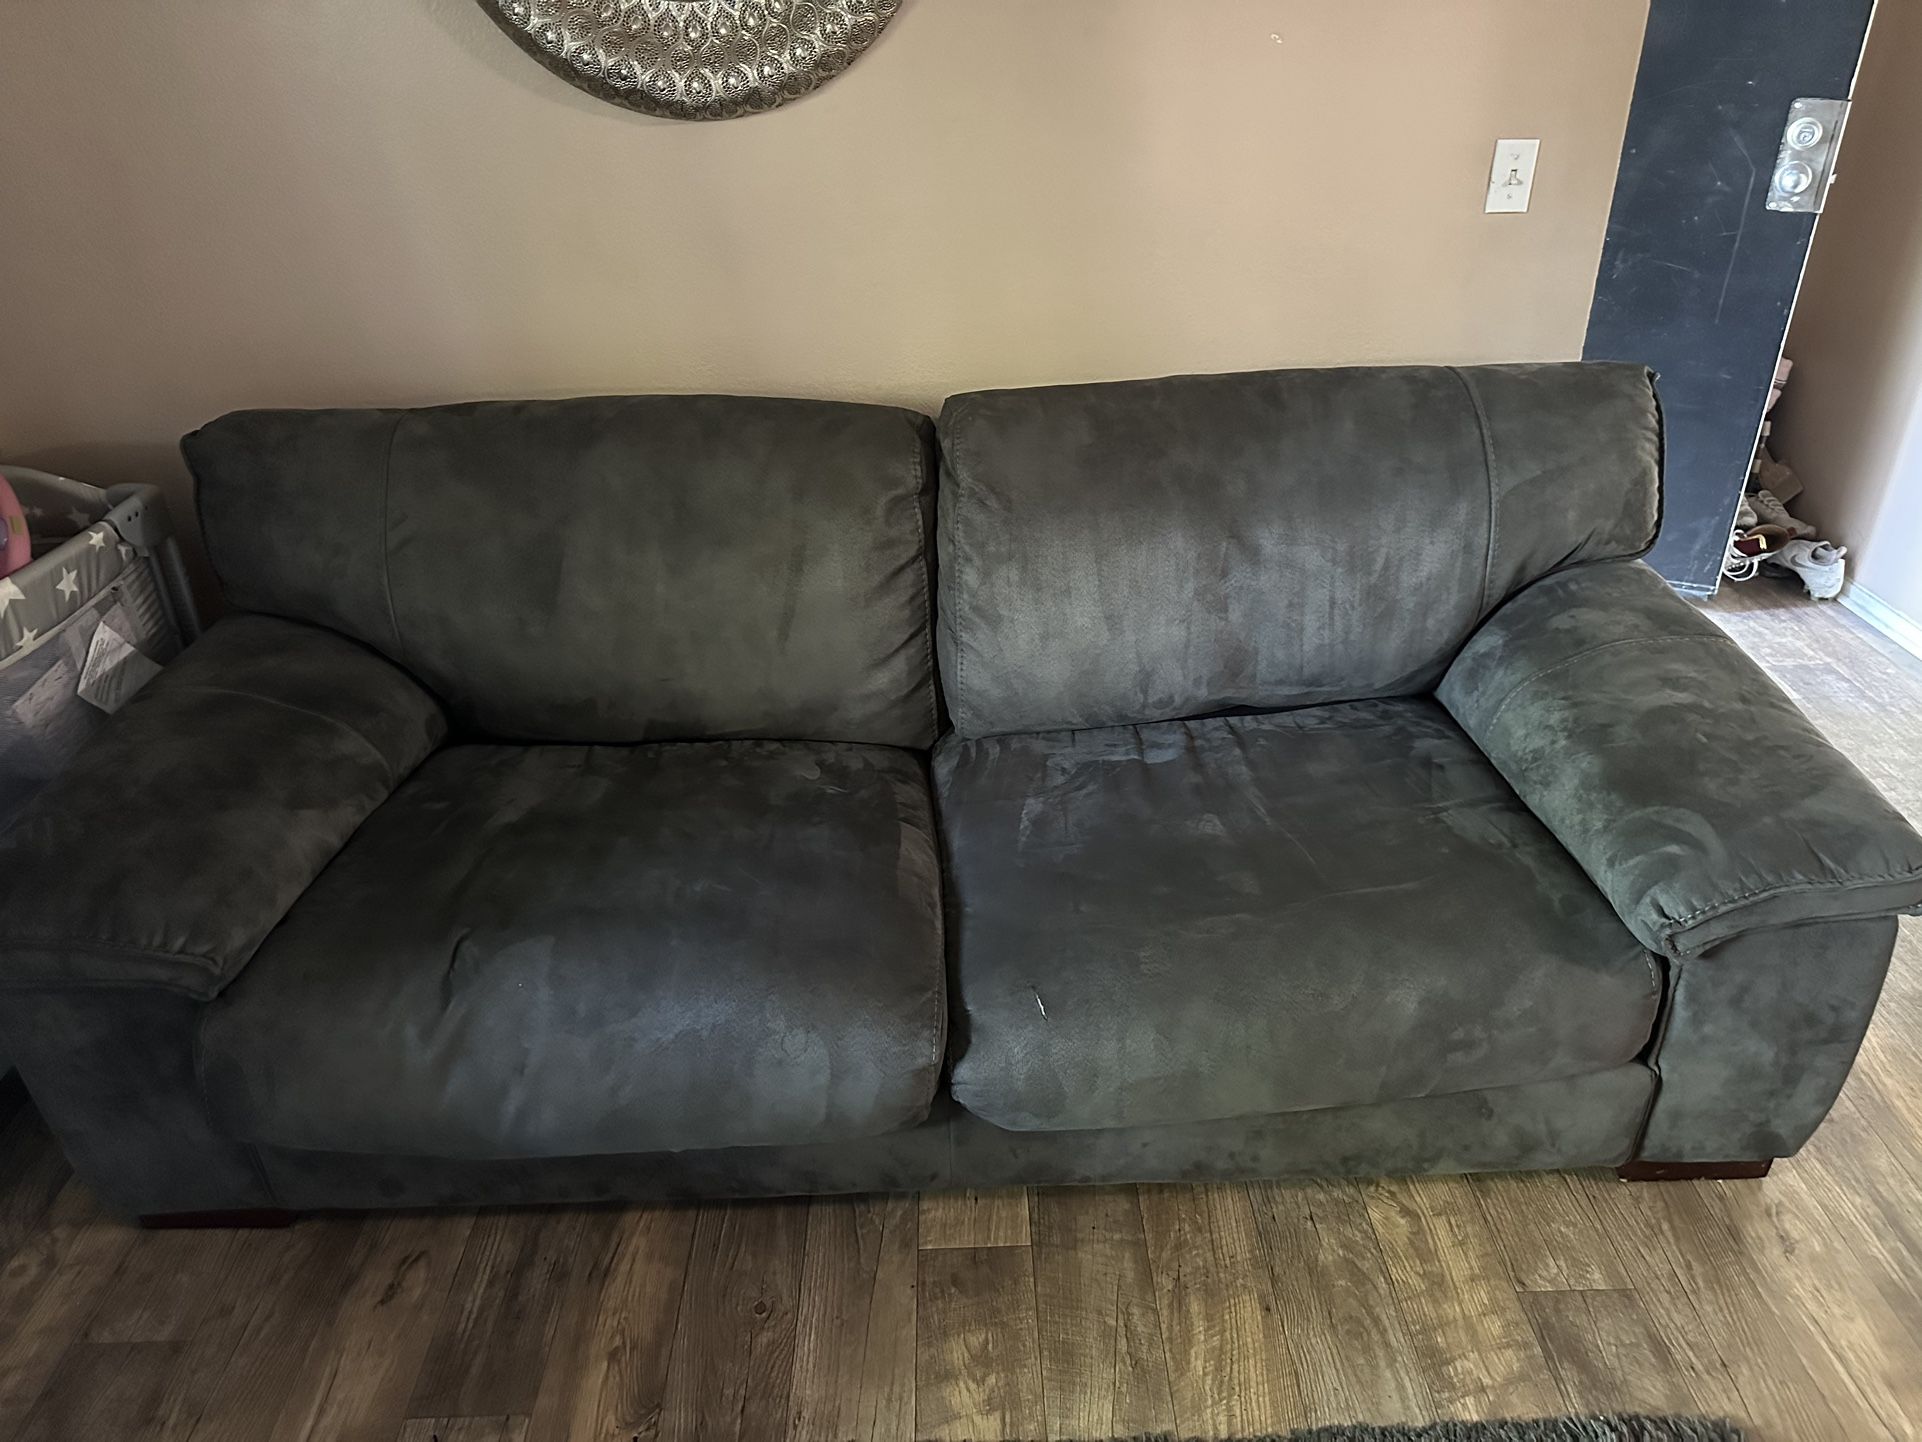 Couch Available-Natomas Area